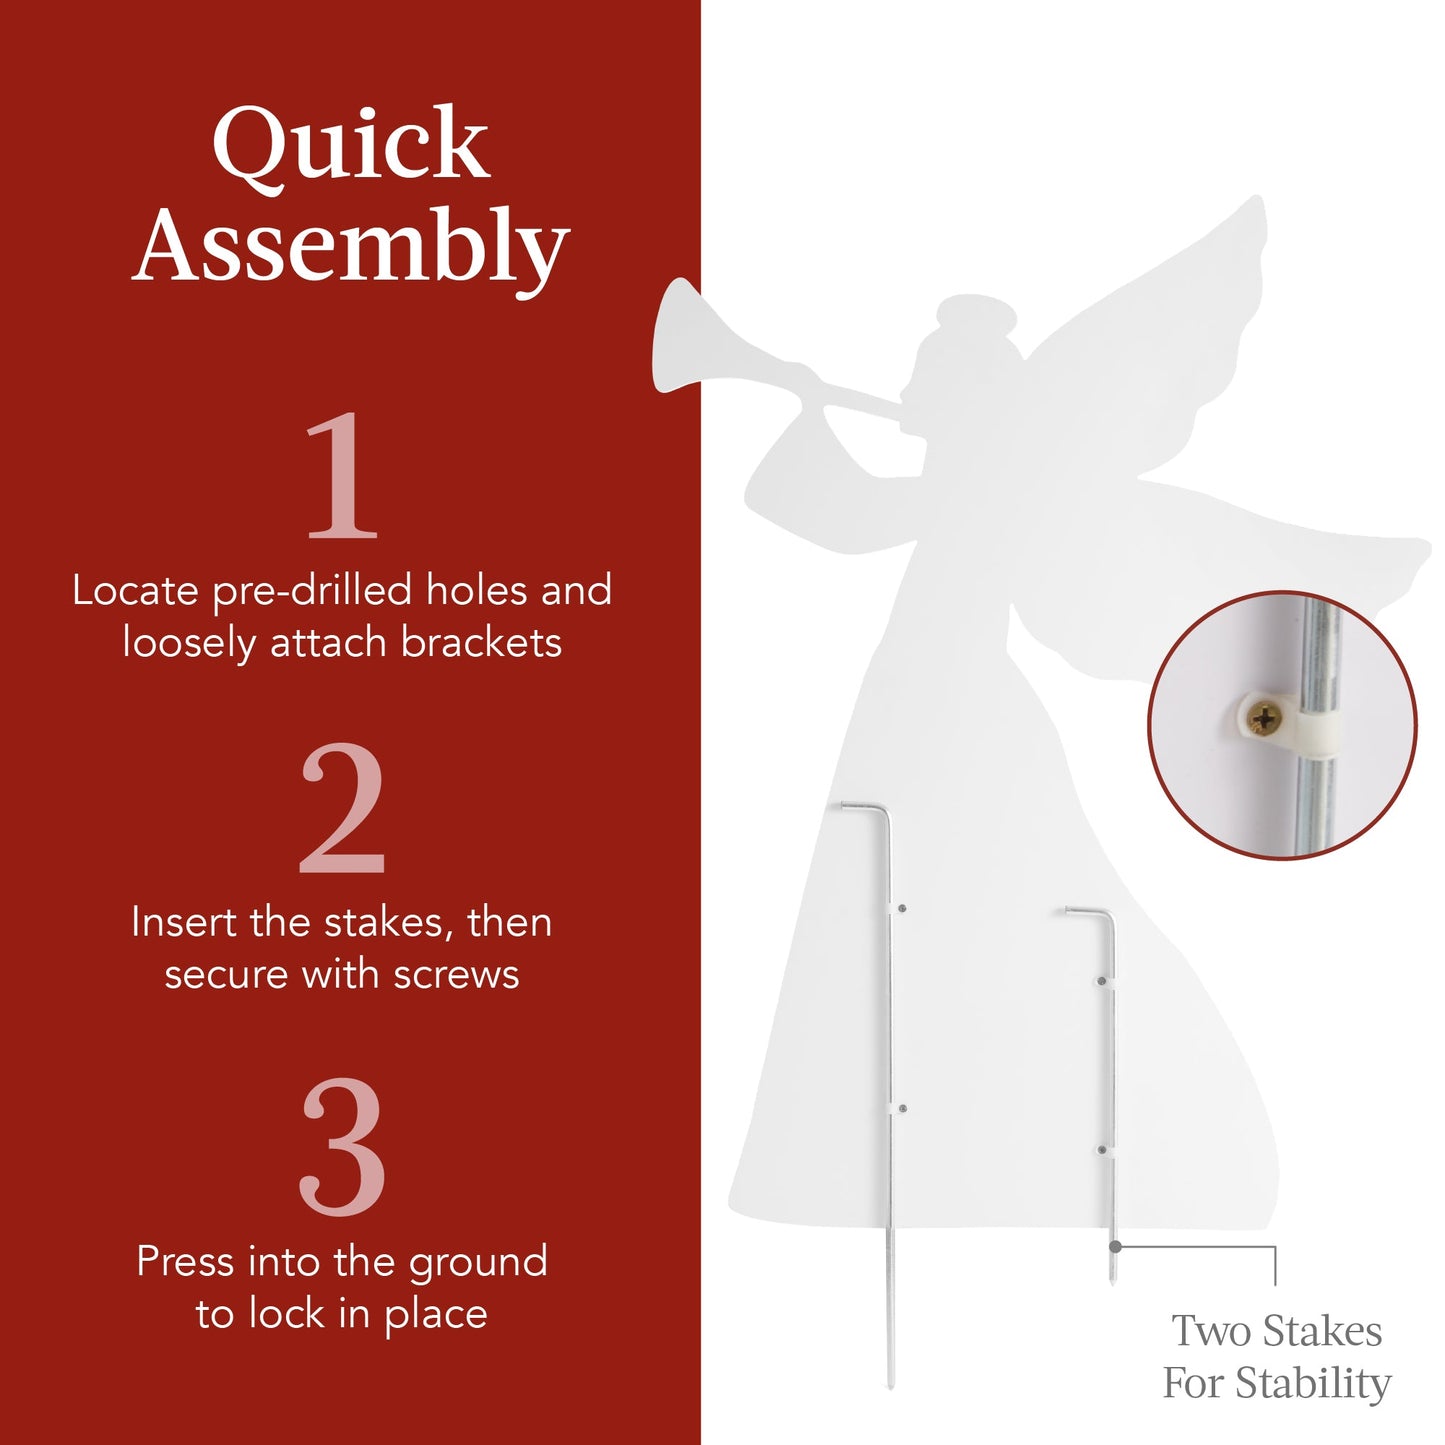 Set of 2 Christmas Angel Yard Decorations w/ Weather-Resistant PVC - 3ft